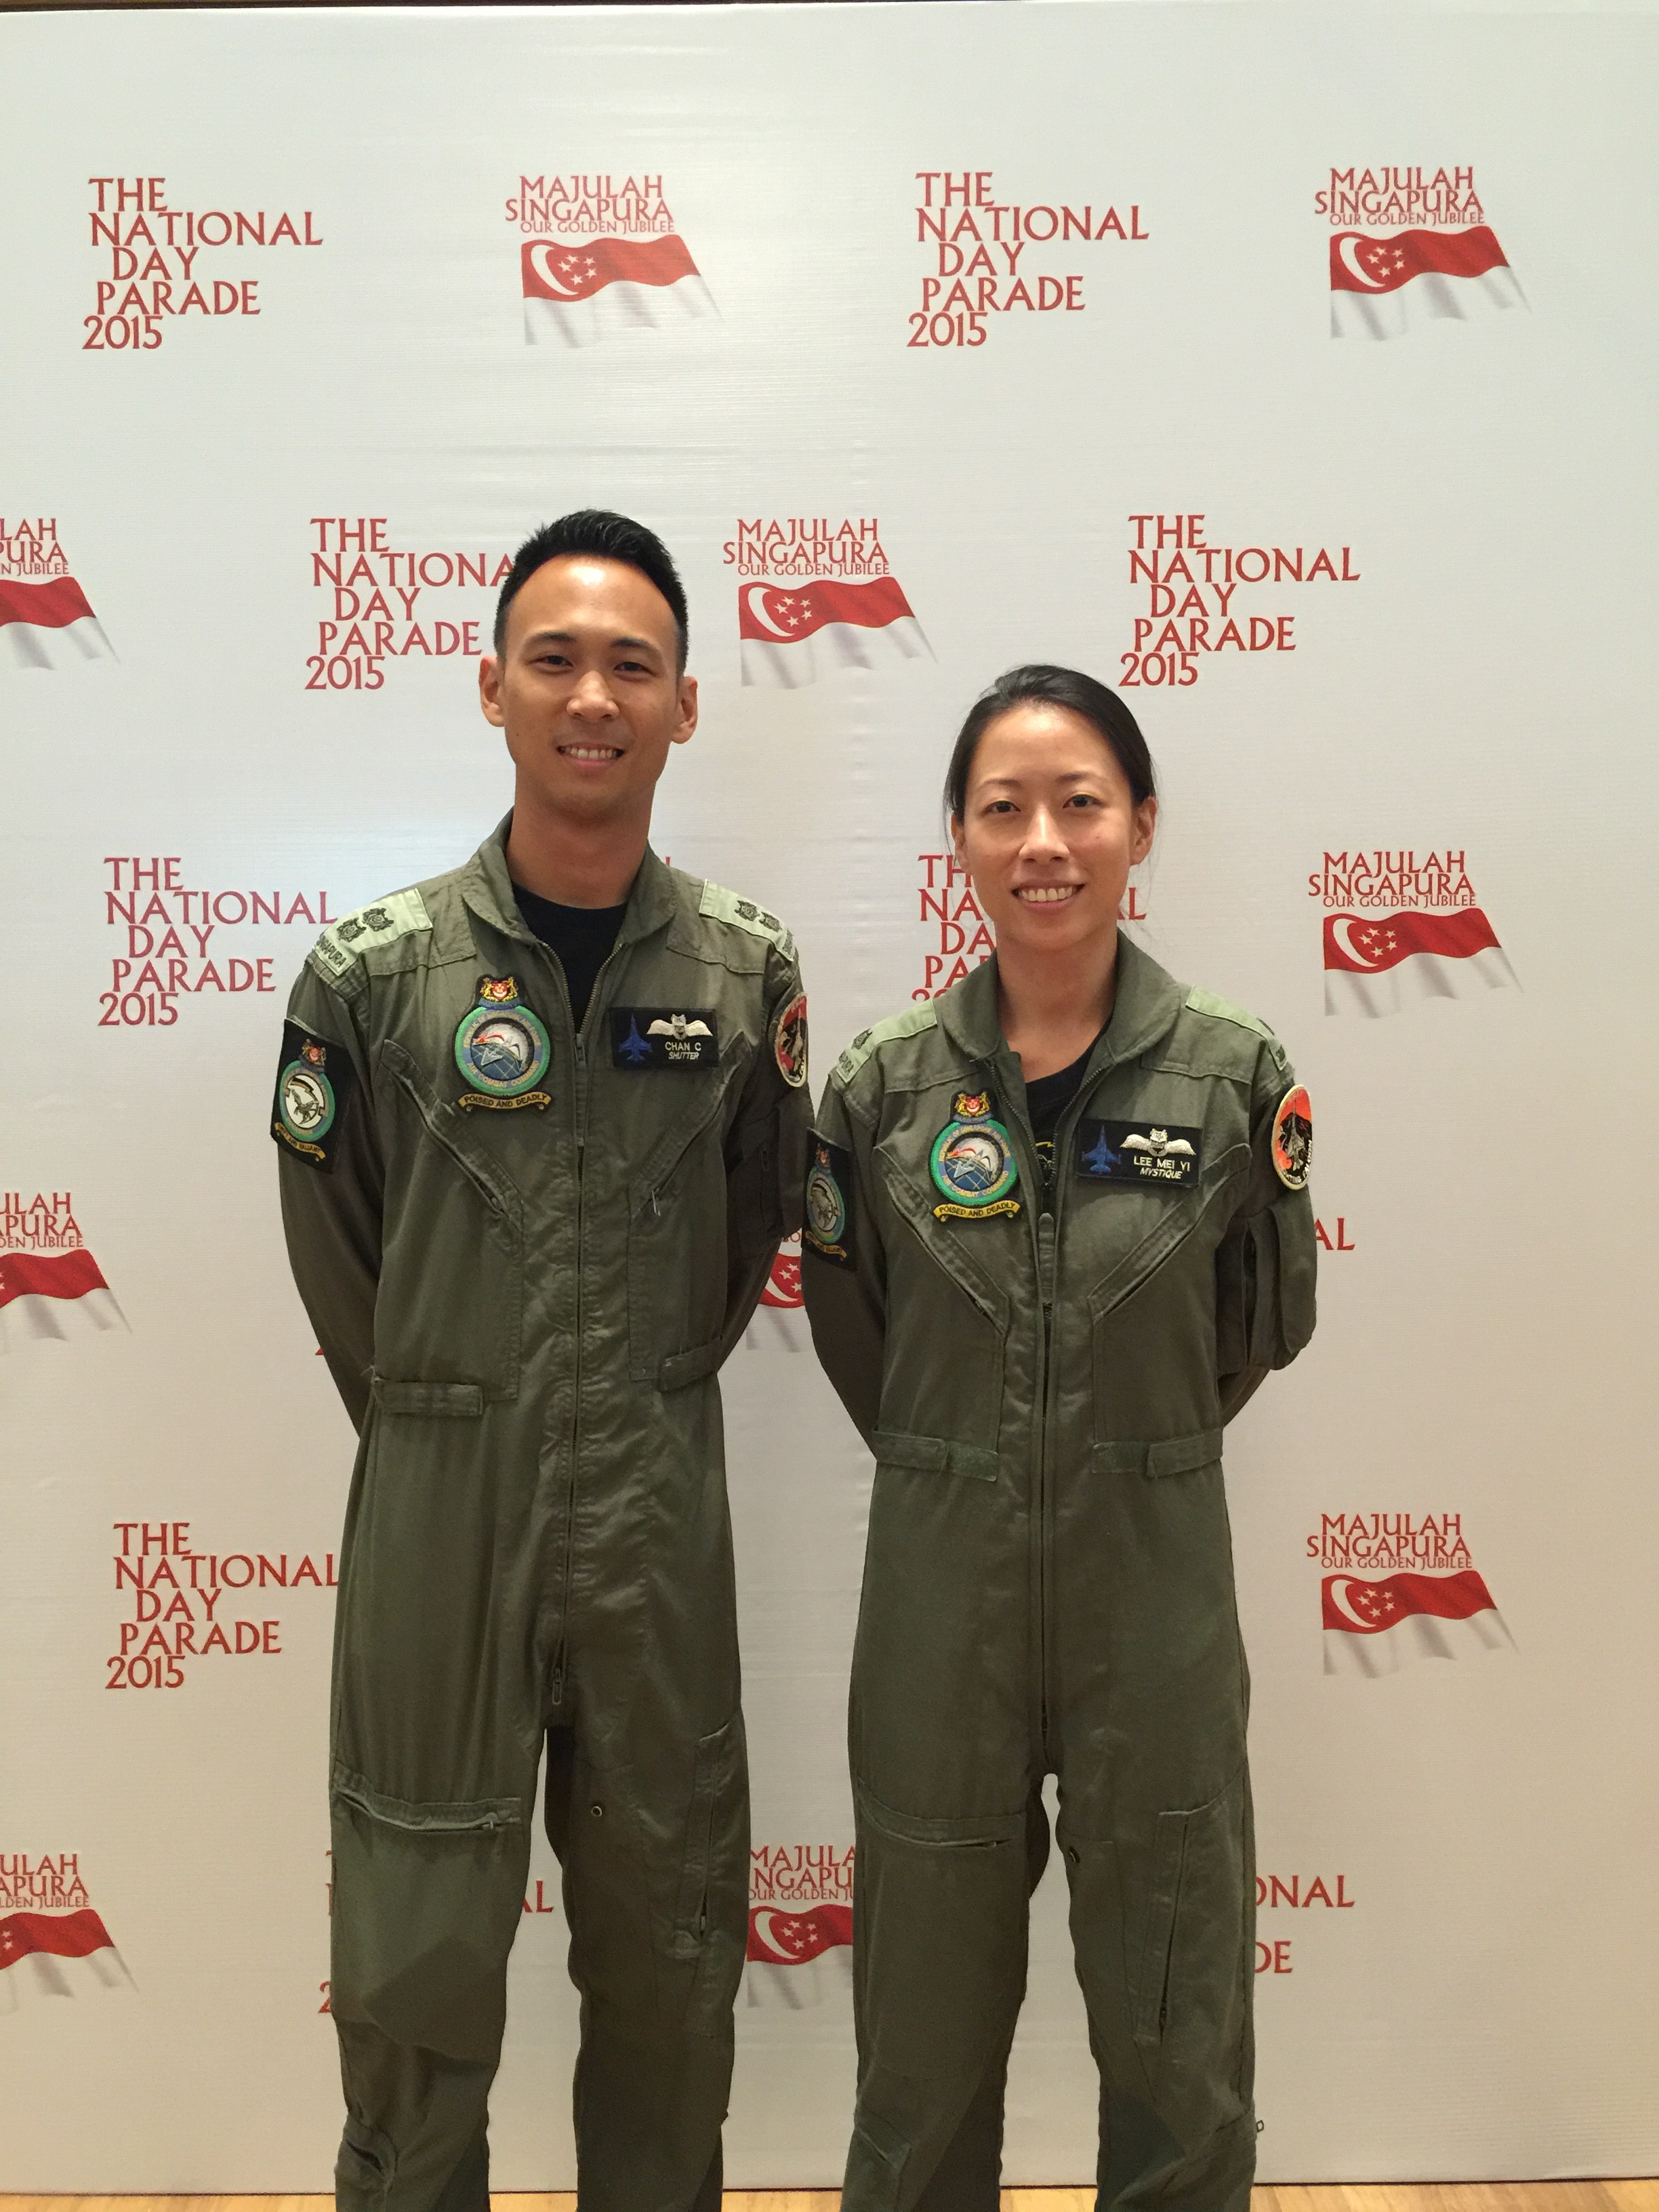 FIRST TO FLY: LTC Chan Ching Hao (Left), will be joined by the first female fighter pilot to participate in the NDP MAJ Lee Mei Yi (Right), to execute the “50” formation flypast comprising of 20 F-16s. Photo: Cherie Quek